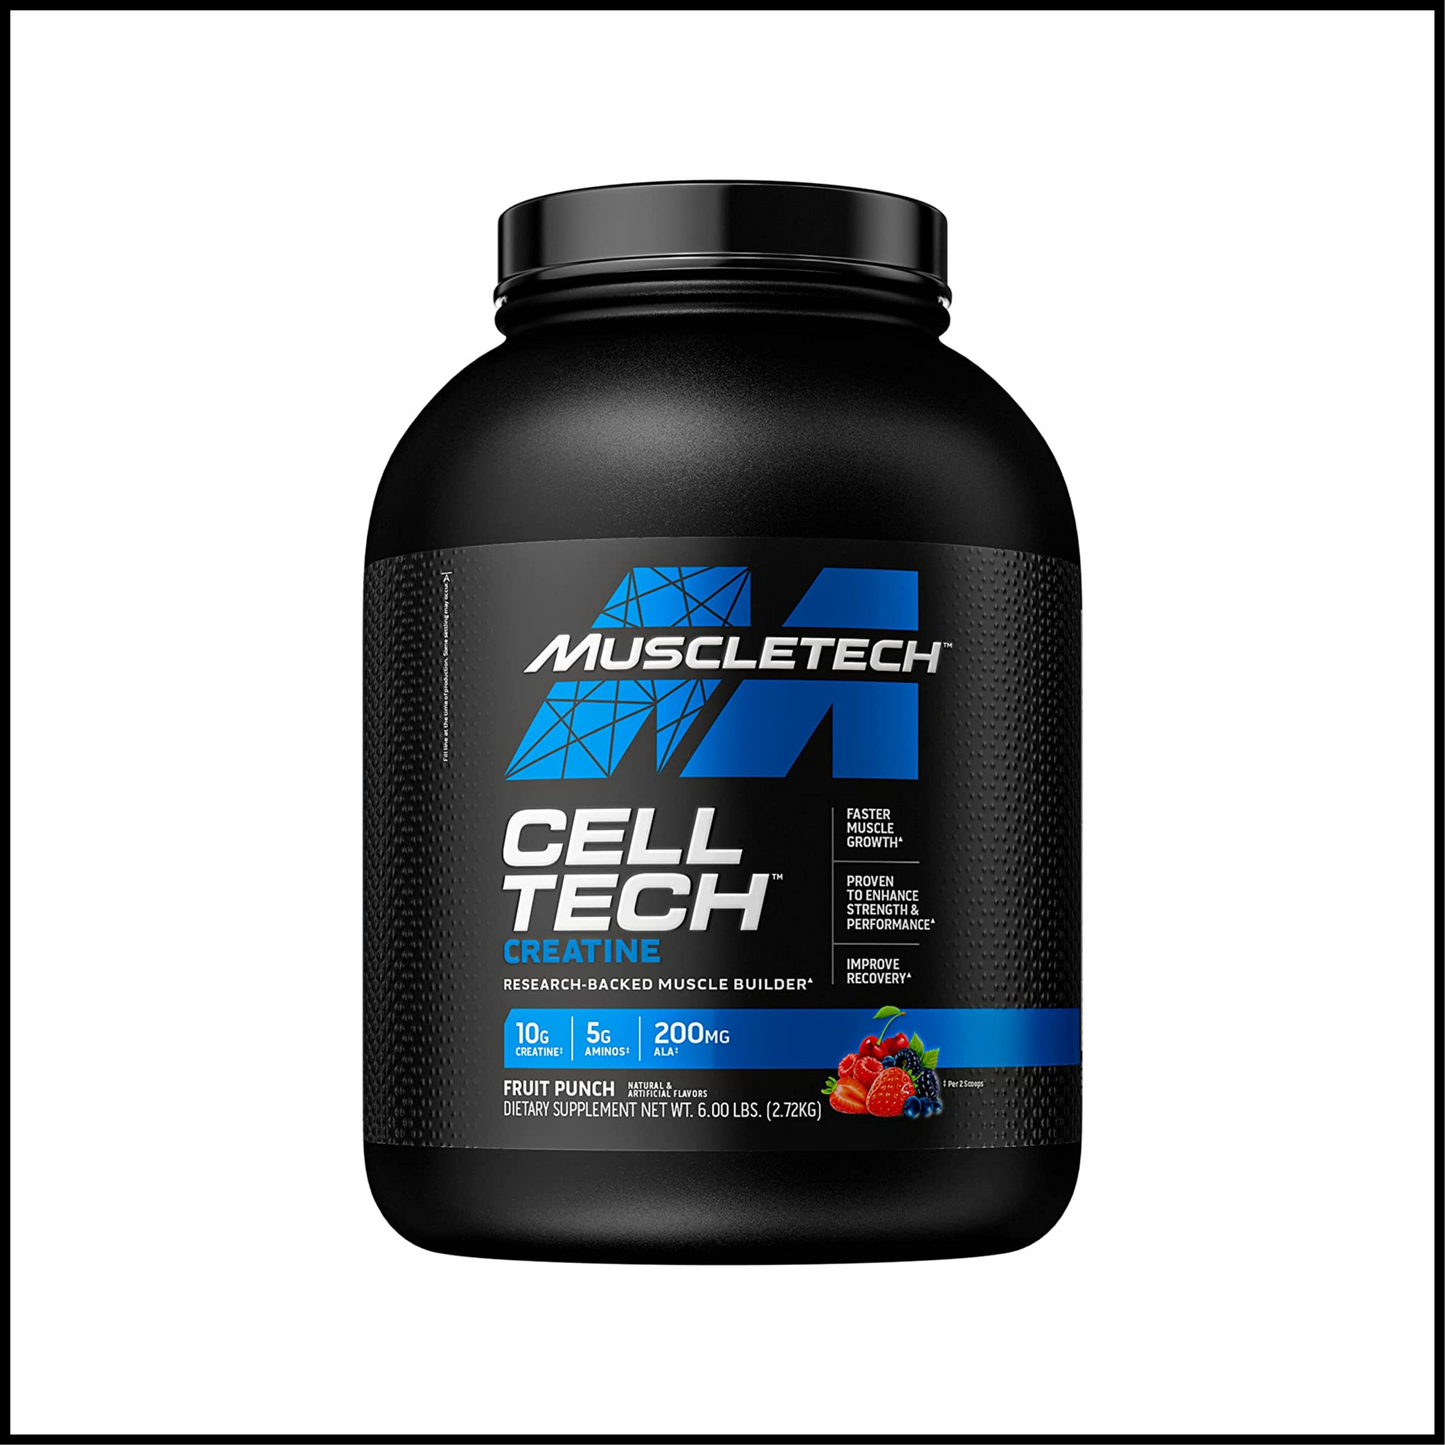 Cell-Tech Creatine Fruit Punch | 6 lbs (56 Servings)